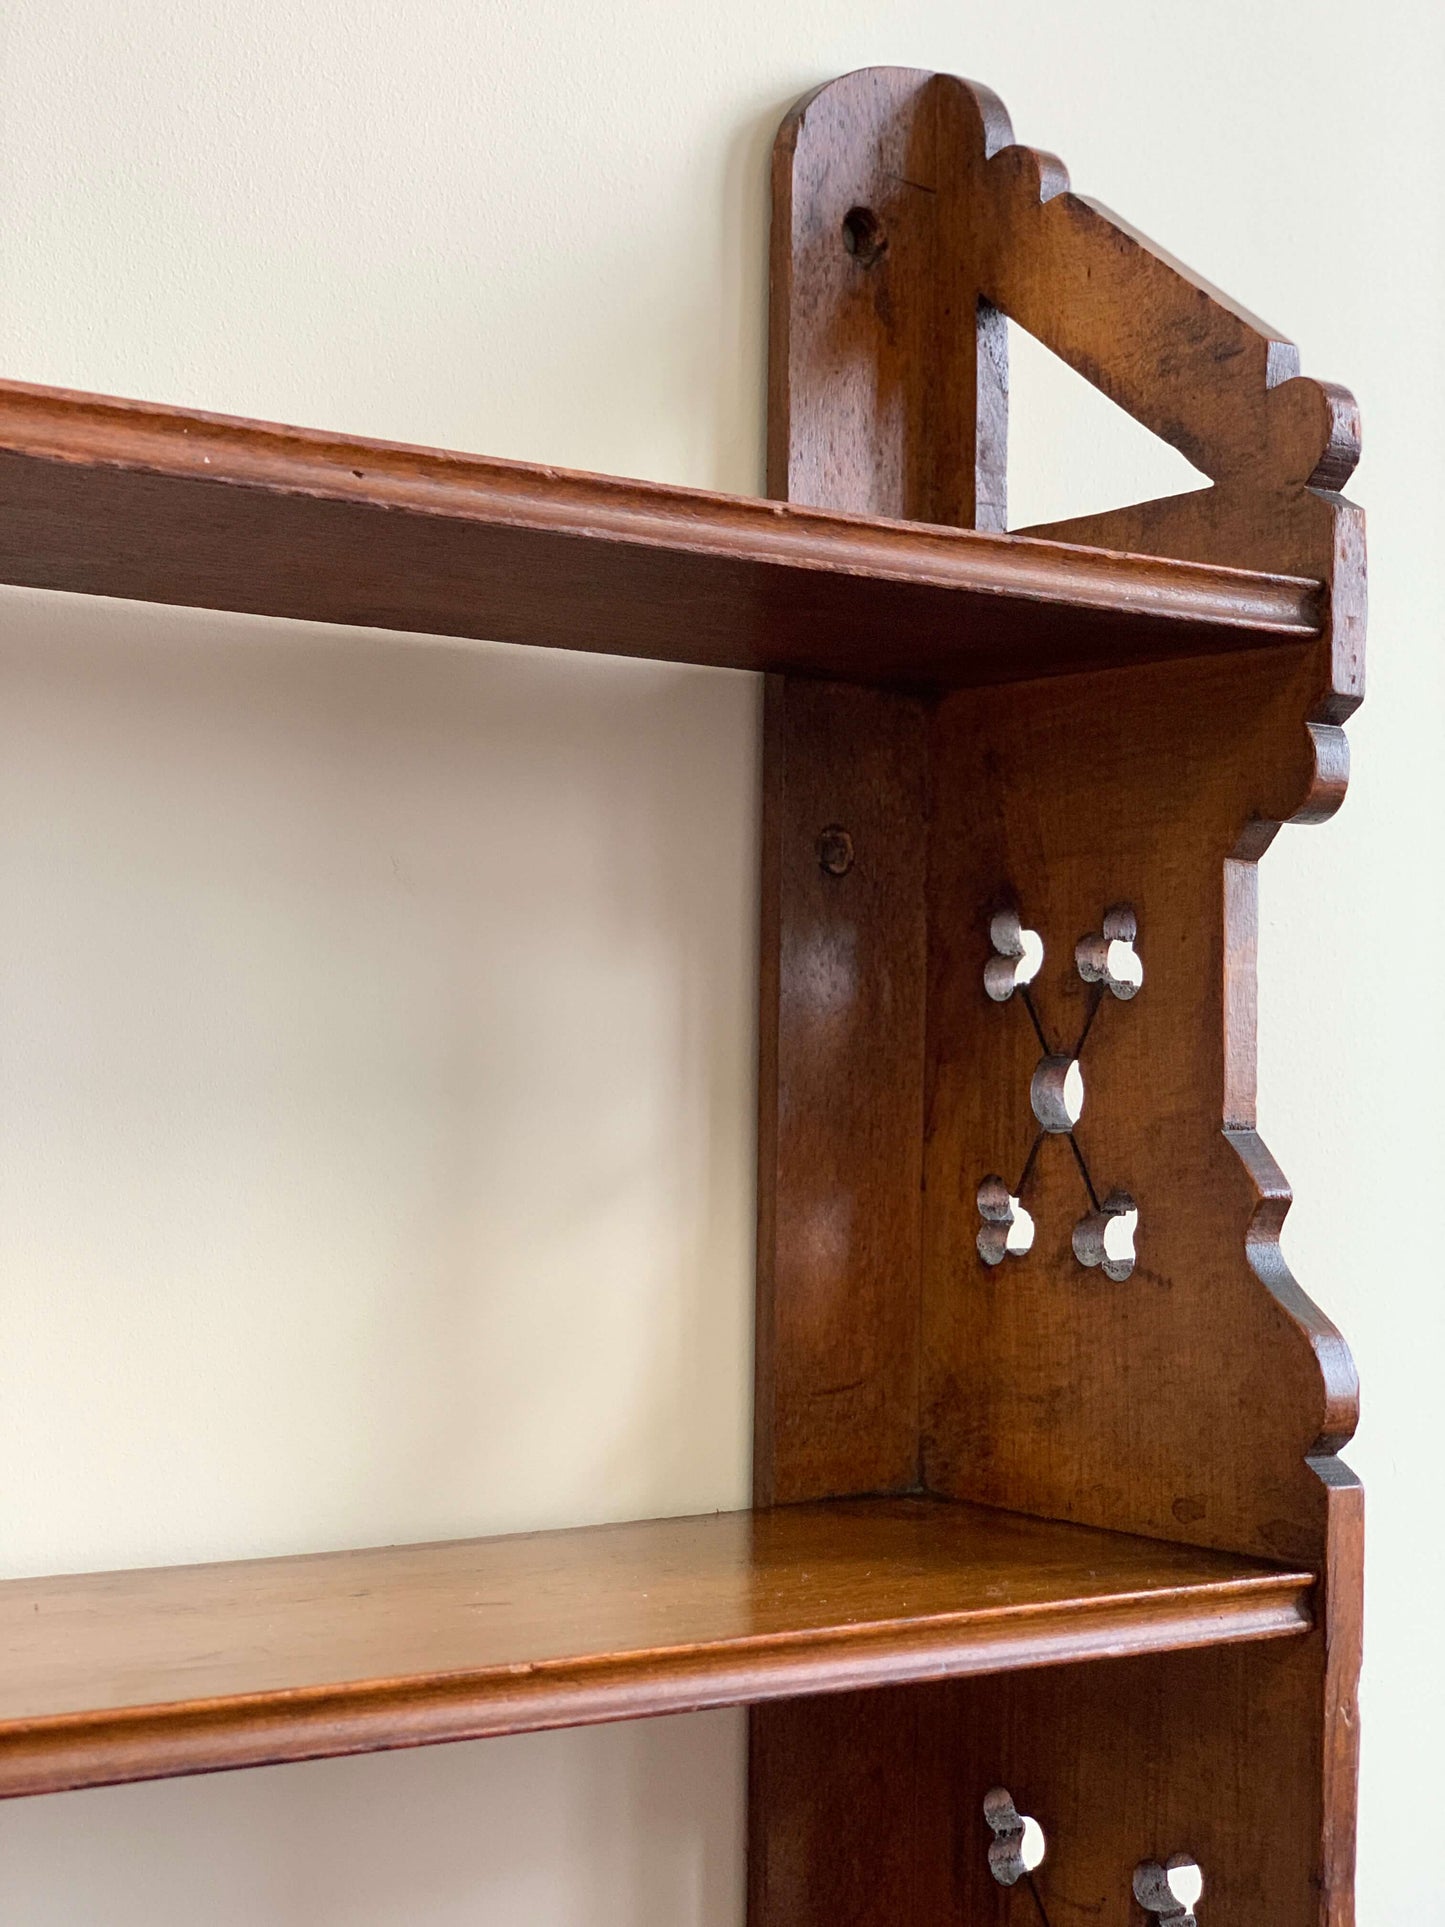 Antique shelf with scalloped detail